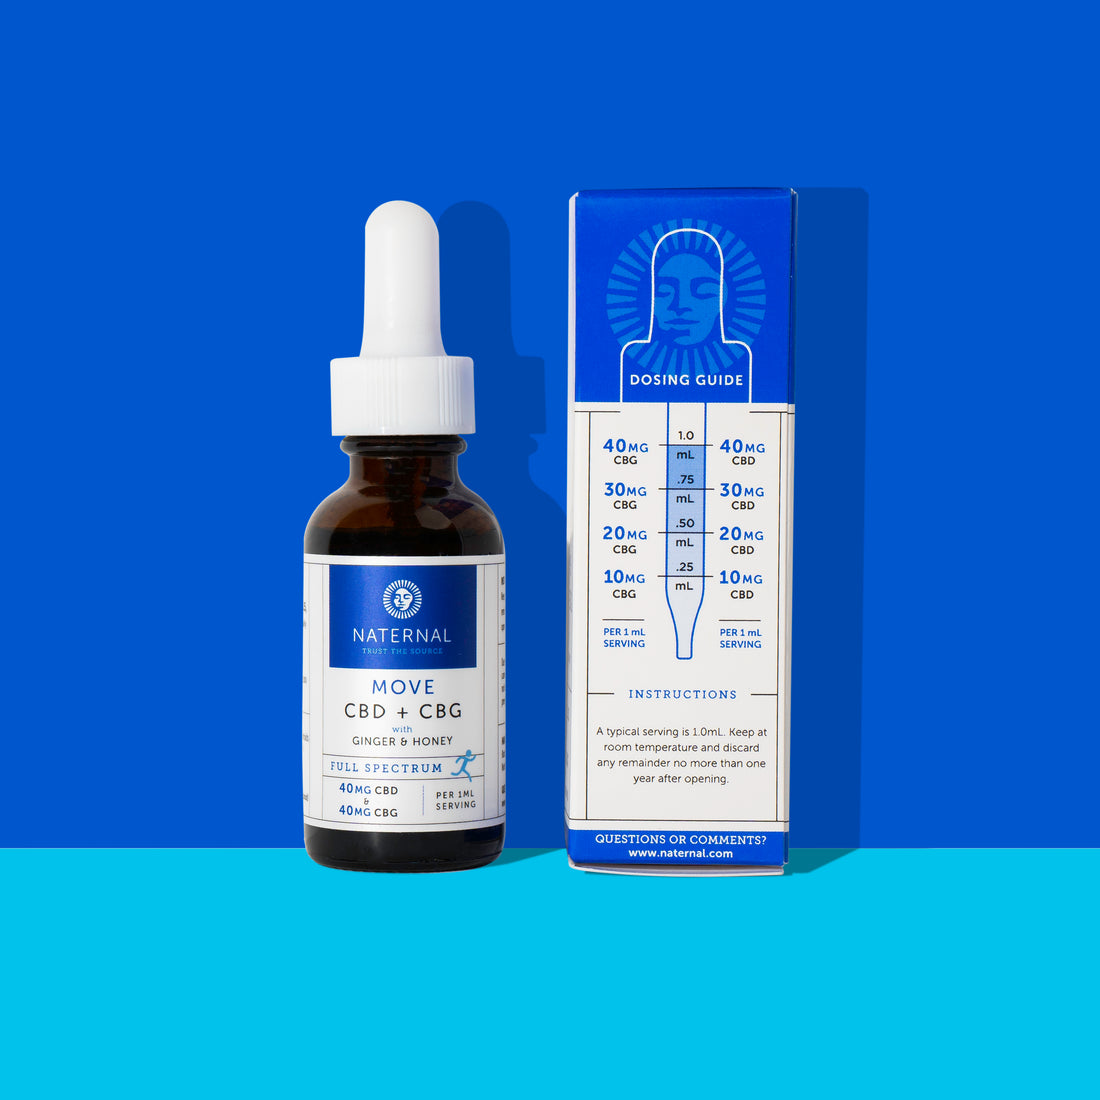 A MOVE CBD + CBG bottle positioned next to its packaging